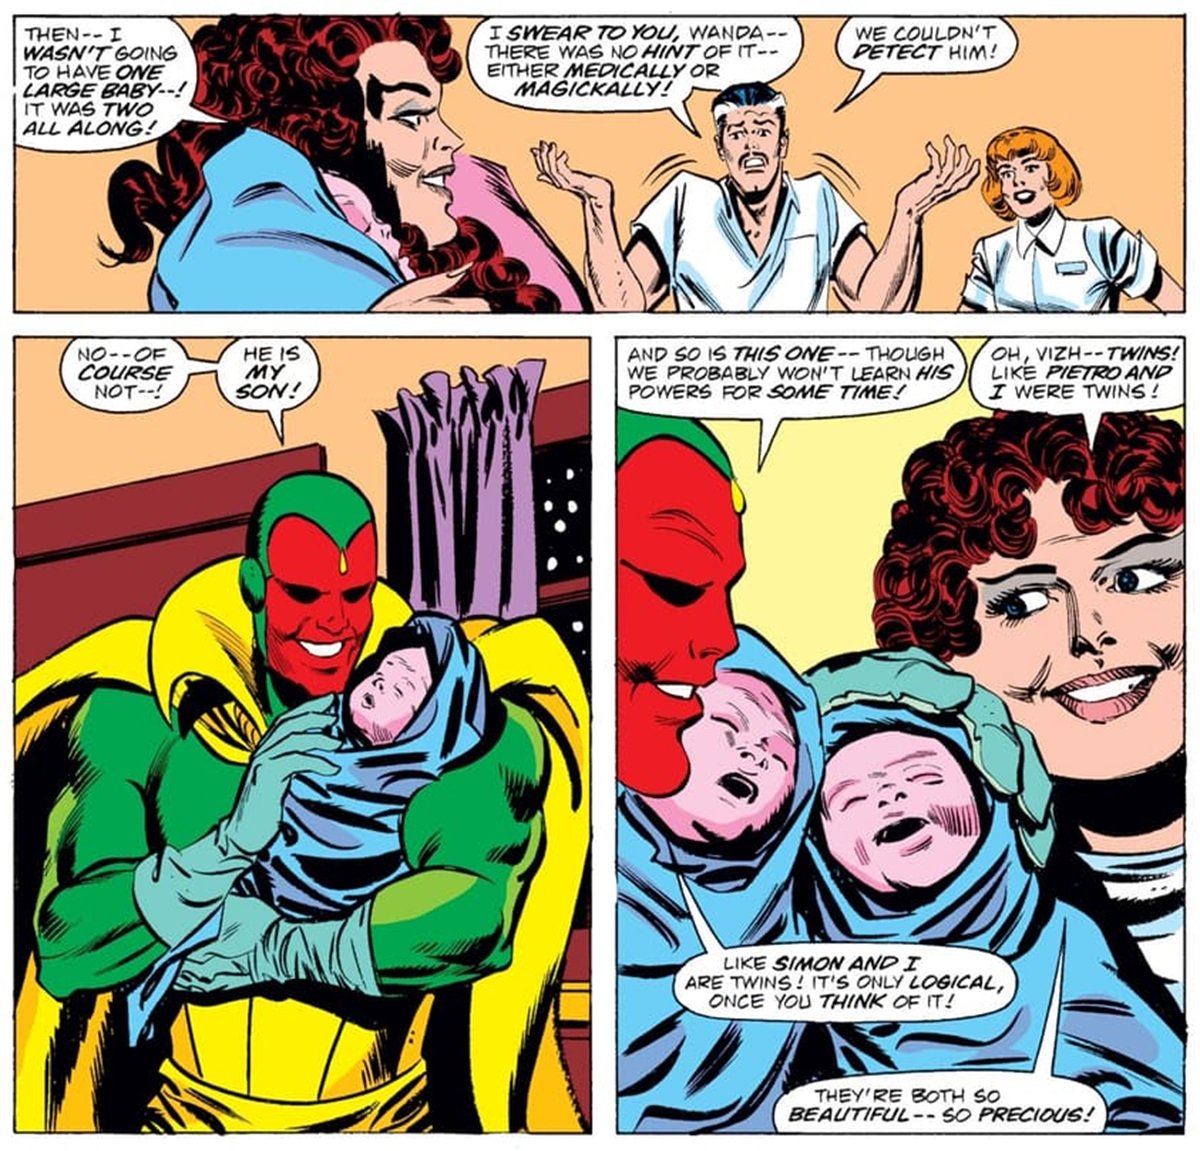 The birth of Billy and Tommy Maximoff, future Young Avengers Wiccan and Speed, in the pages of The Vision and the Scarlet Witch.